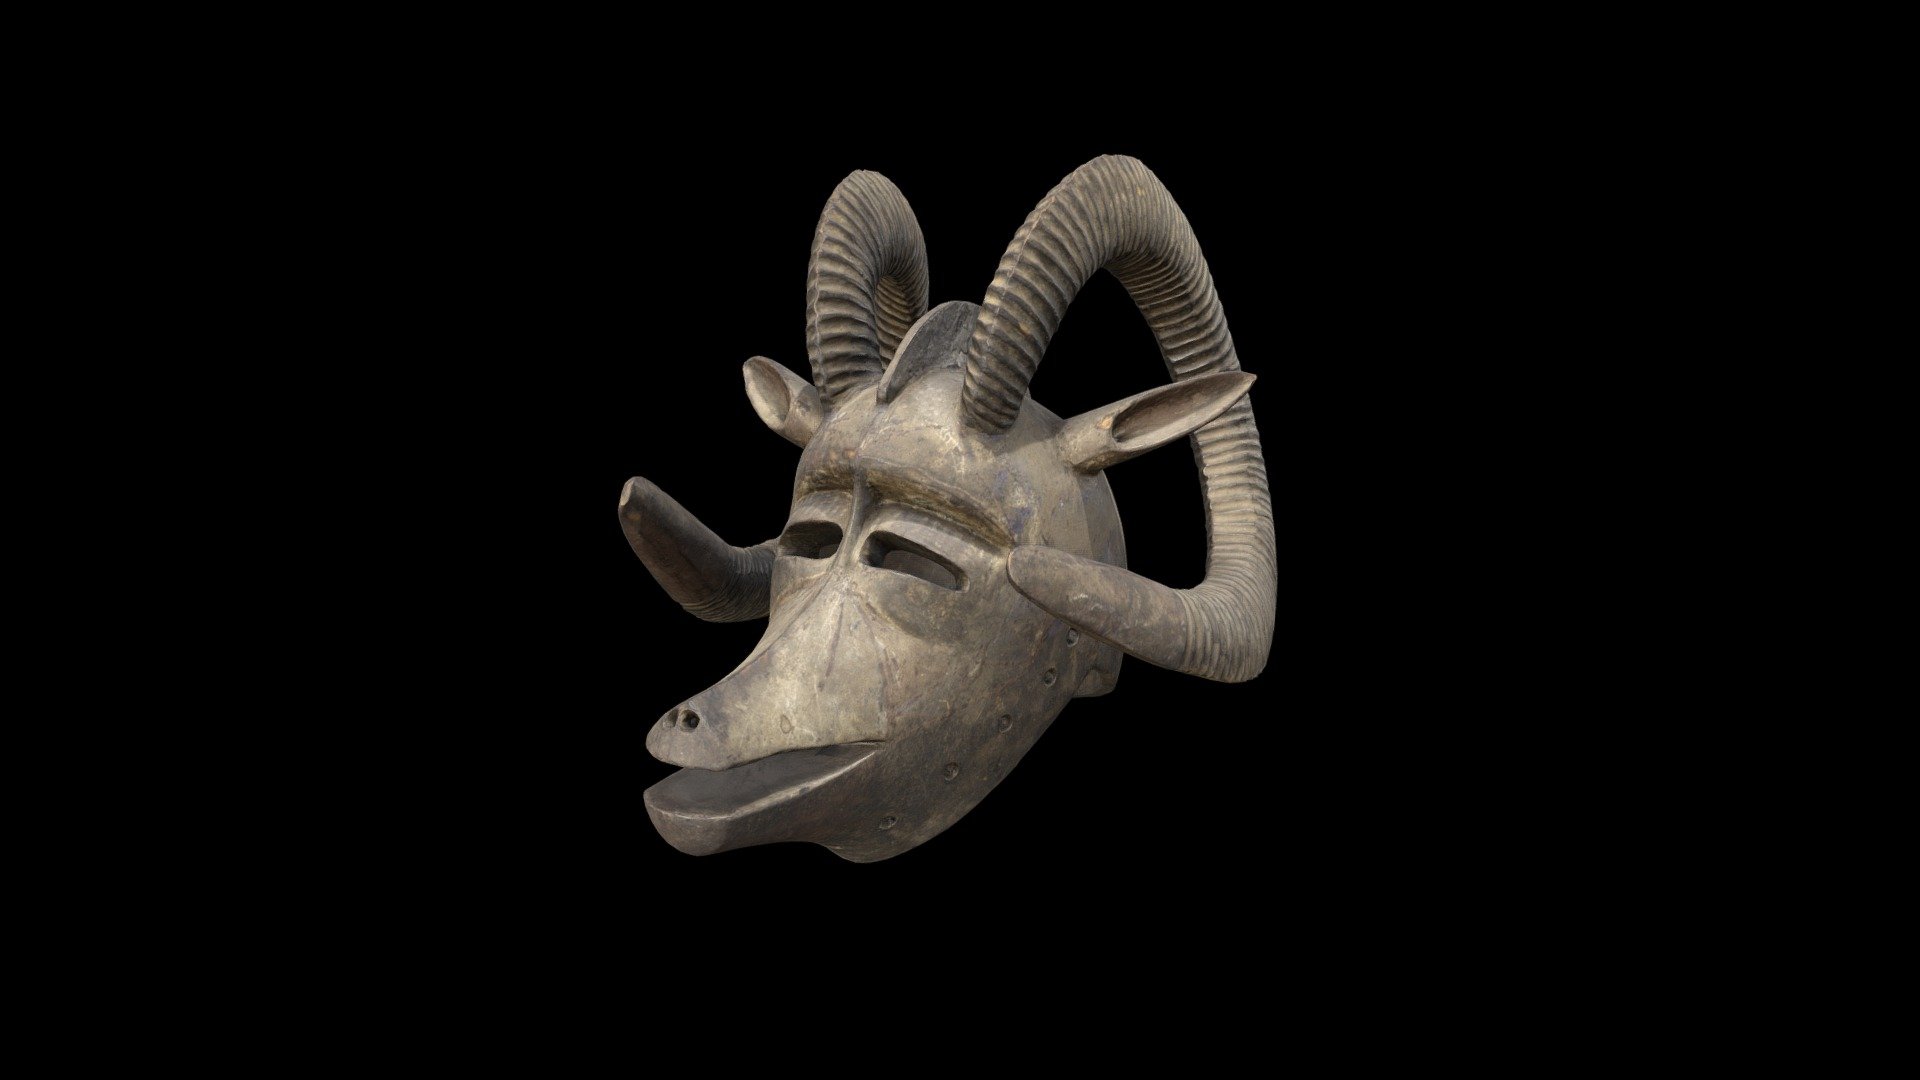 You can copy, modify, and distribute this work, even for commercial purposes, all without asking permission. Learn more about The Cleveland Museum of Art’s Open Access initiative: http://www.clevelandart.org/open-access-faqs

Ram Mask (Bolo), possibly early 1900s. Africa, West Africa, Burkina Faso, Bobo-style blacksmith-carver. Wood and paint; overall: 45 x 36 x 36 cm (17 11/16 x 14 3/16 x 14 3/16 in.). The Cleveland Museum of Art, René and Odette Delenne Collection, Leonard C. Hanna, Jr. Fund 2016.56

Learn more on The Cleveland Museum of Art’s Collection Online: https://www.clevelandart.org/art/2016.56 - 2016.56 Ram Mask (Bolo) - Download Free 3D model by Cleveland Museum of Art (@clevelandart) 3d model